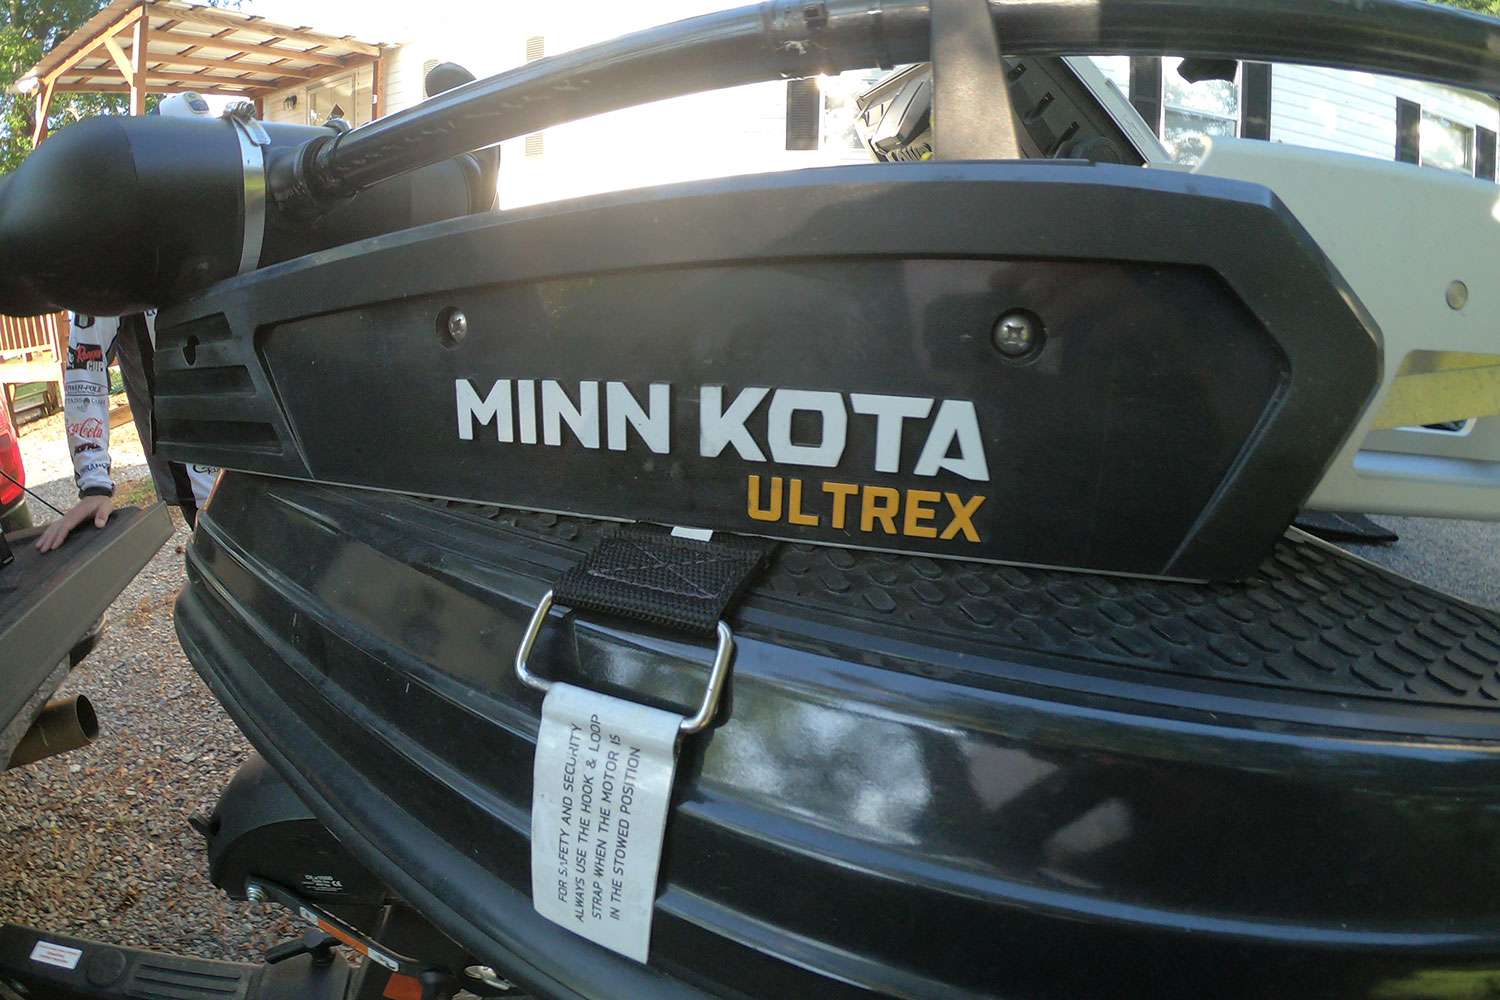 Starting at the front, his rig is powered with a Minn Kota Ultrex. 